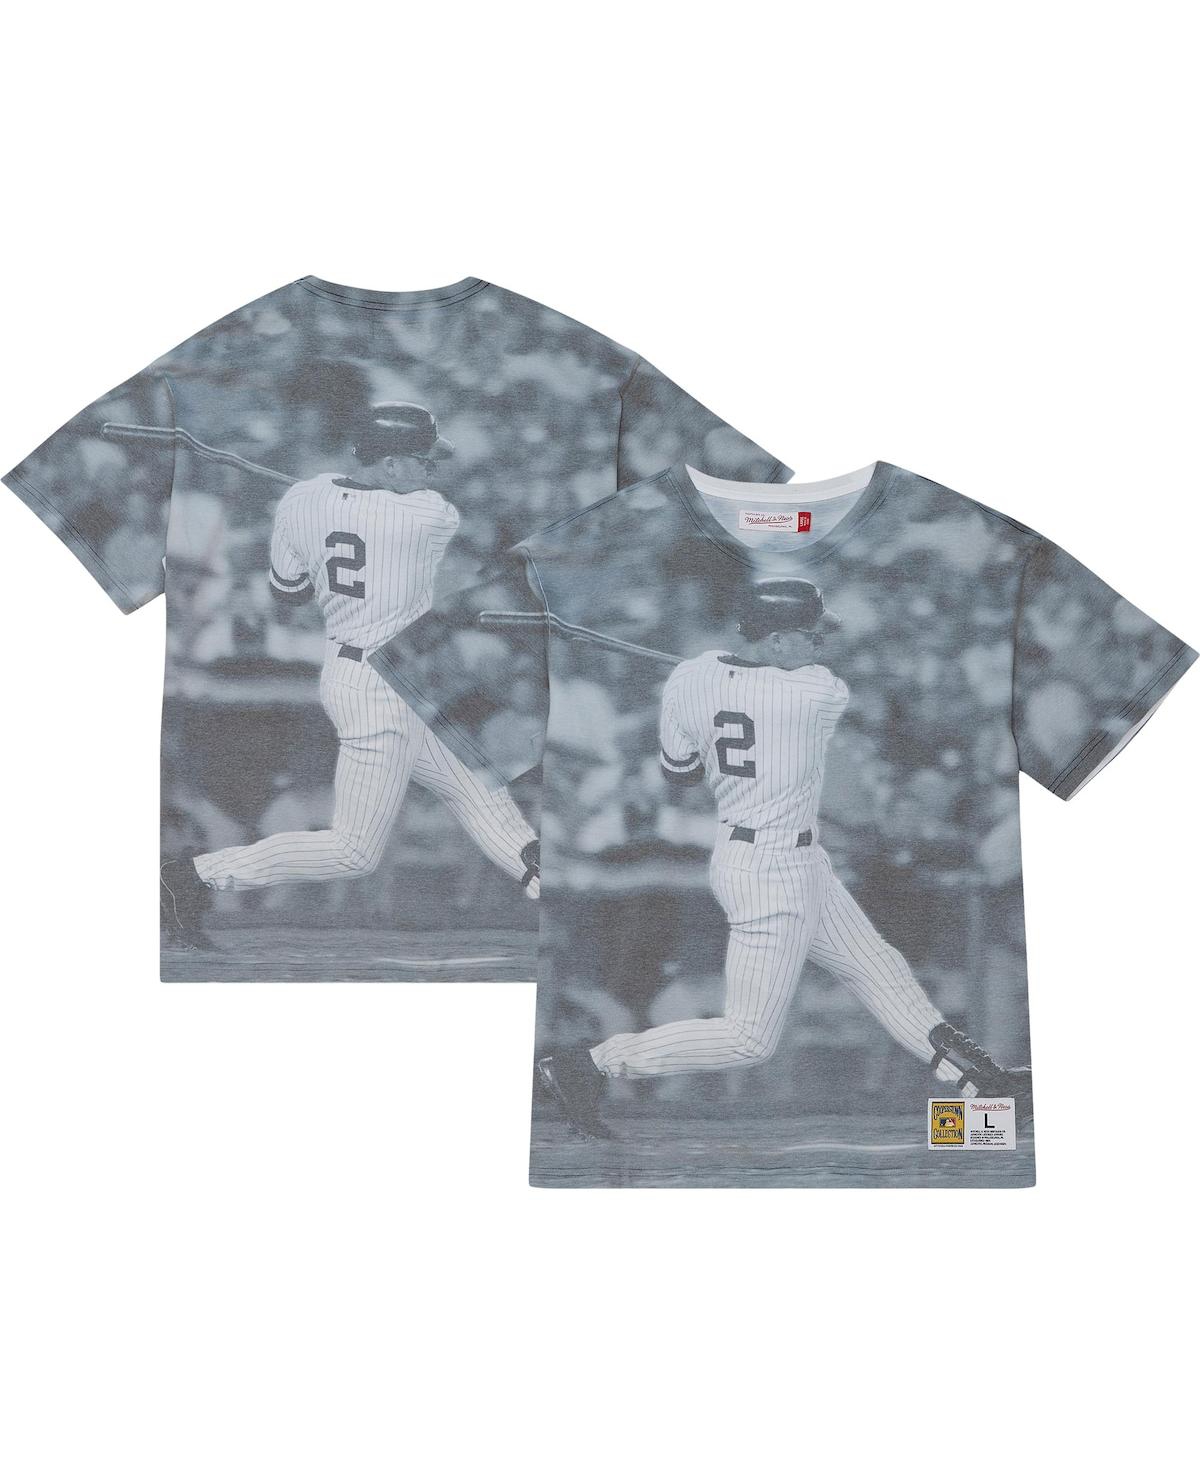 Mitchell & Ness Highlight Sublimated Player Tee Seattle Mariners Ken Griffey Jr